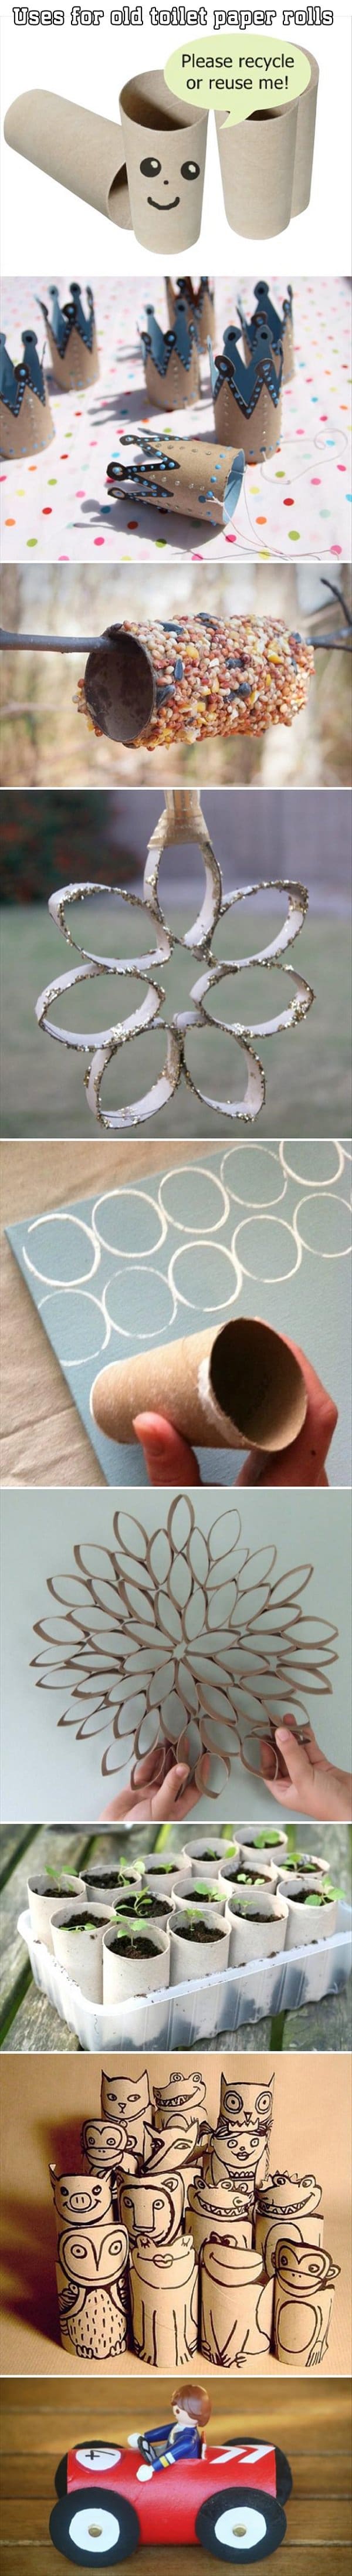 uses for toilet paper rolls